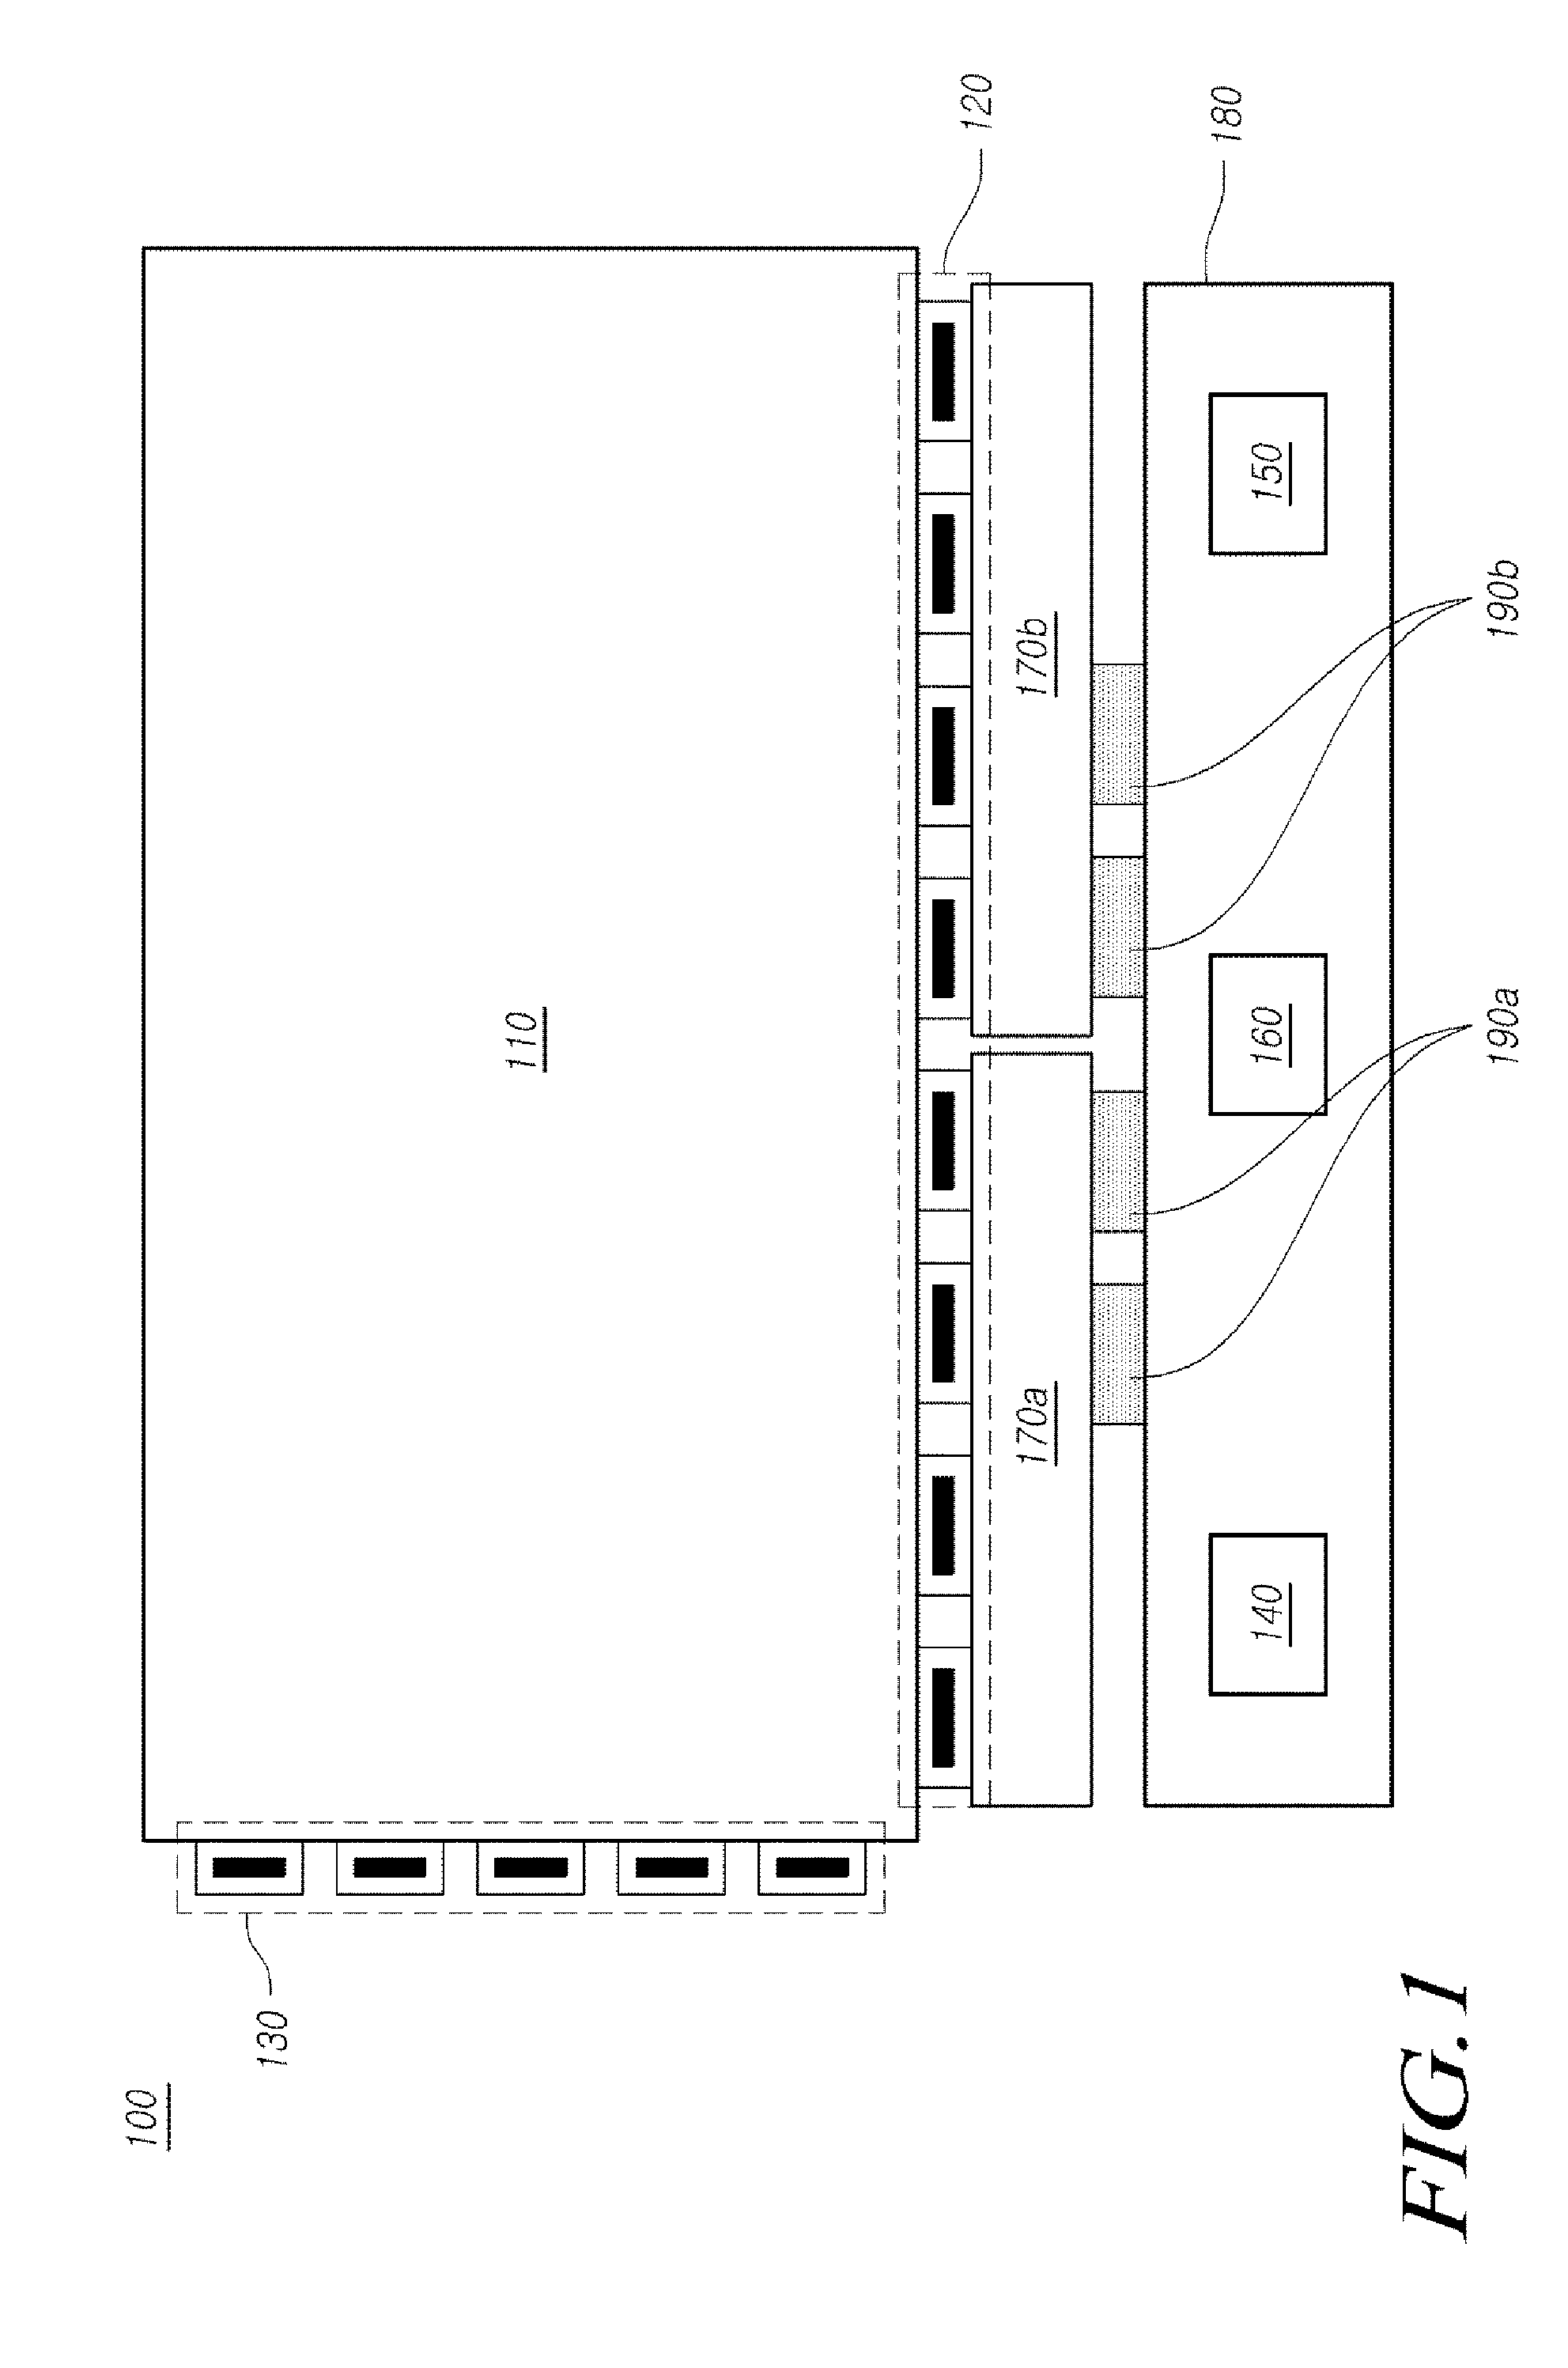 Display device and timing controller